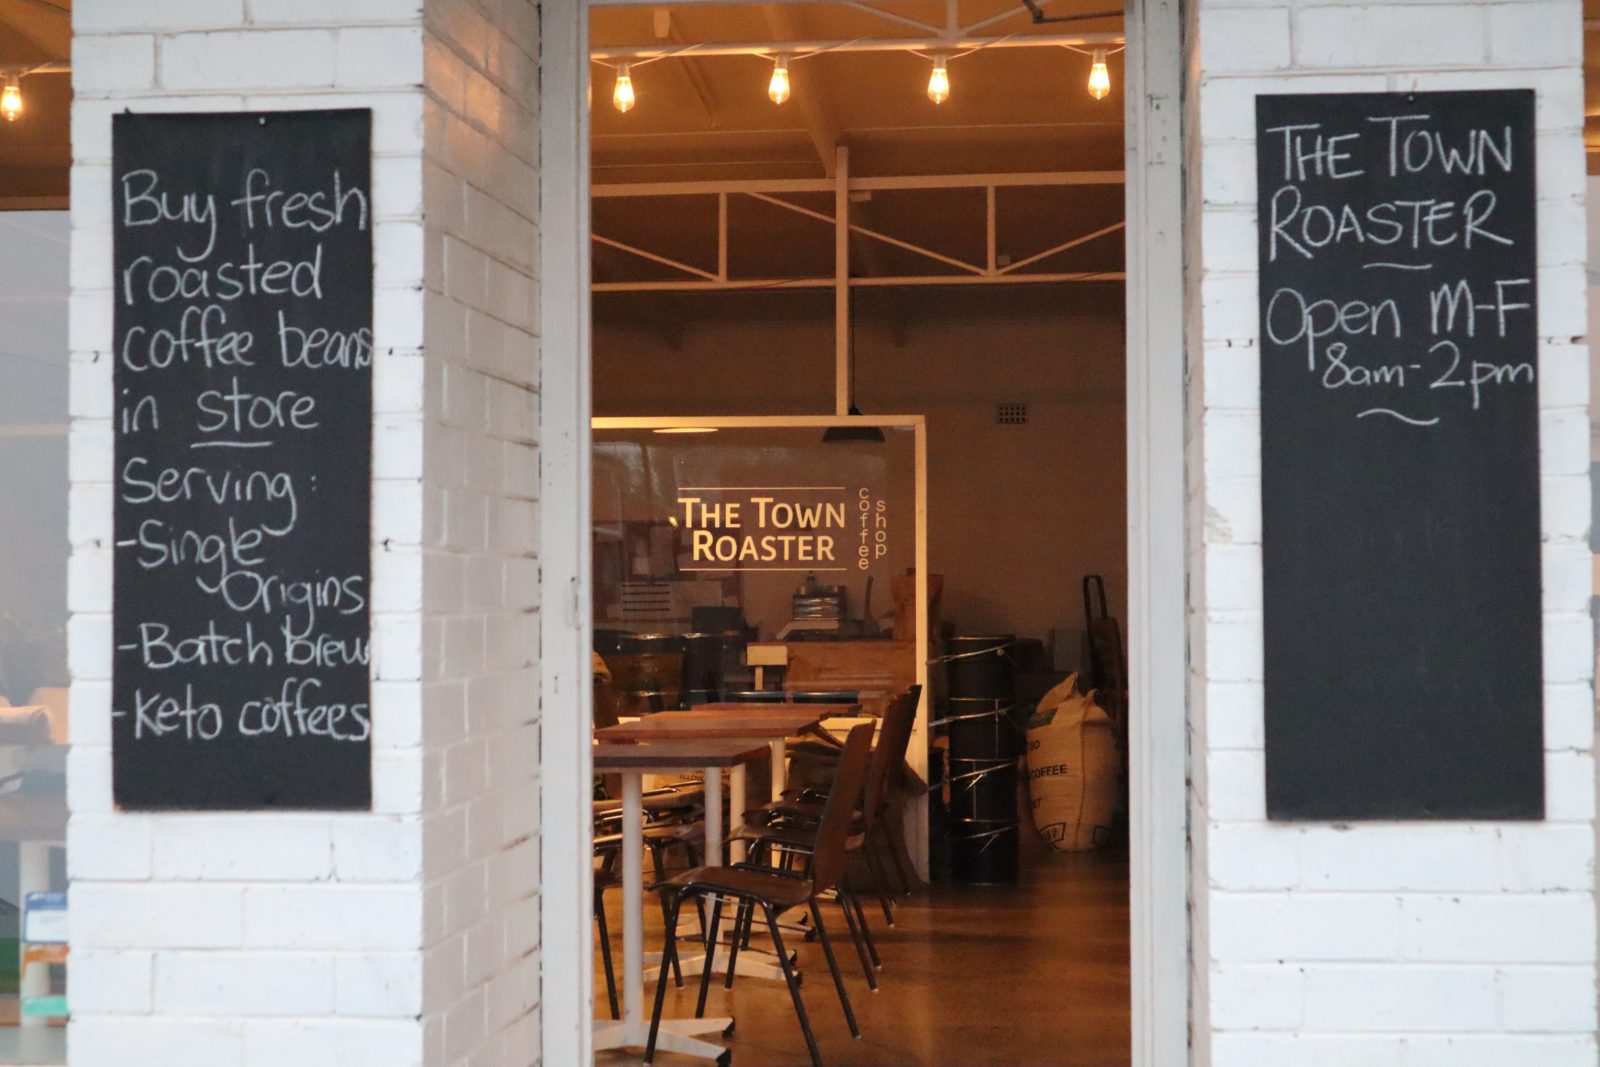 The Town Roaster coffee shop and roastery